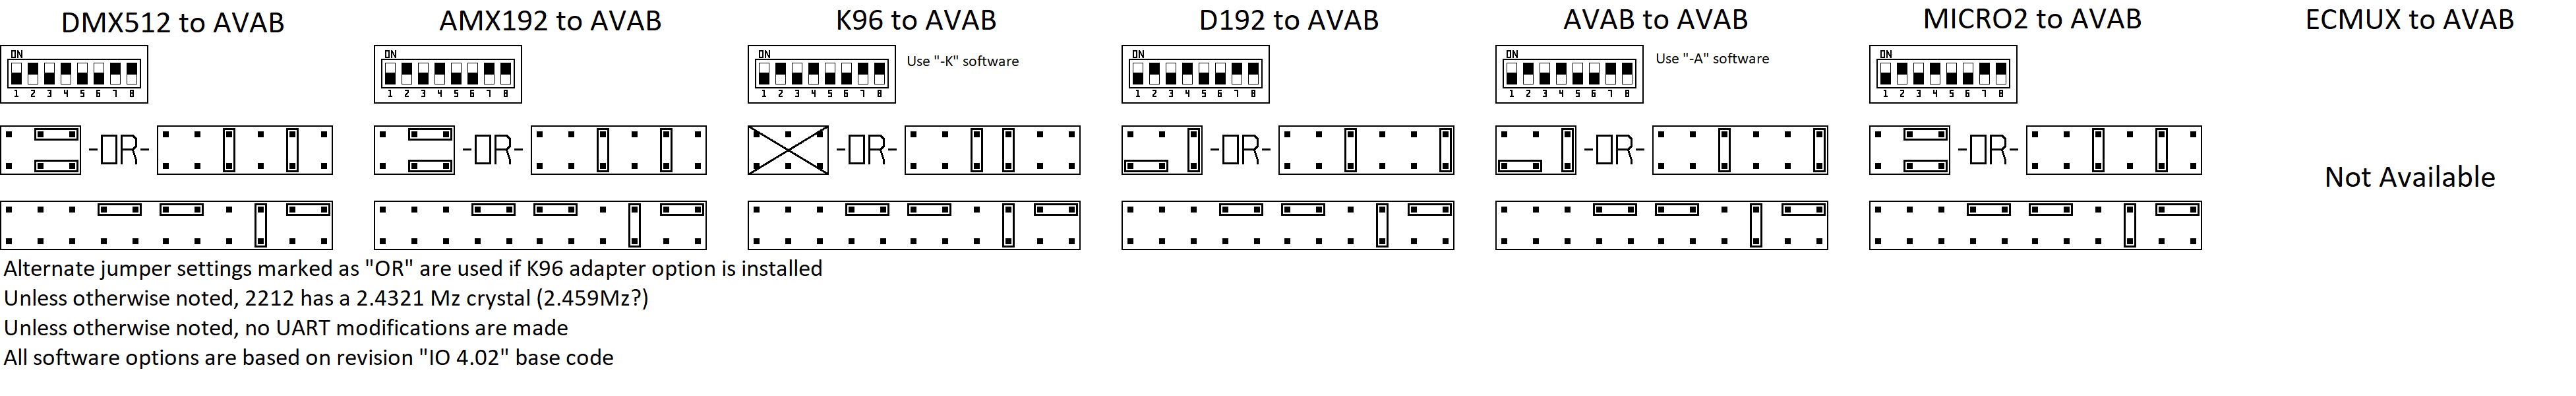 RD2031 Input to AVAB.png